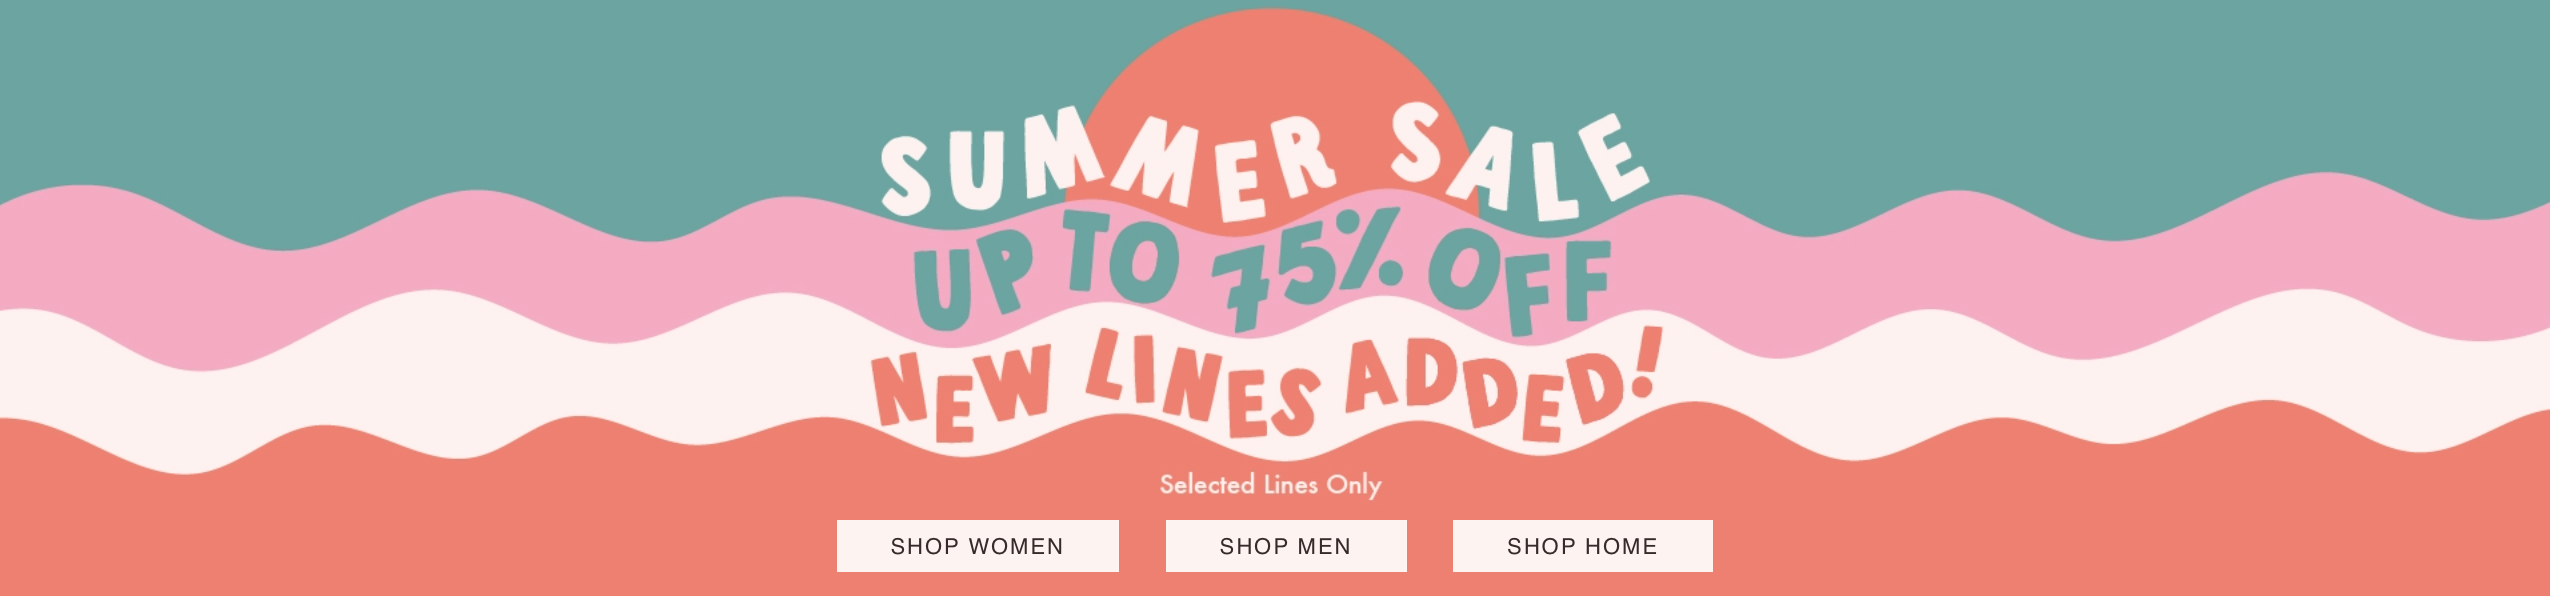 Urban Outfitters: summer sale up to 75%